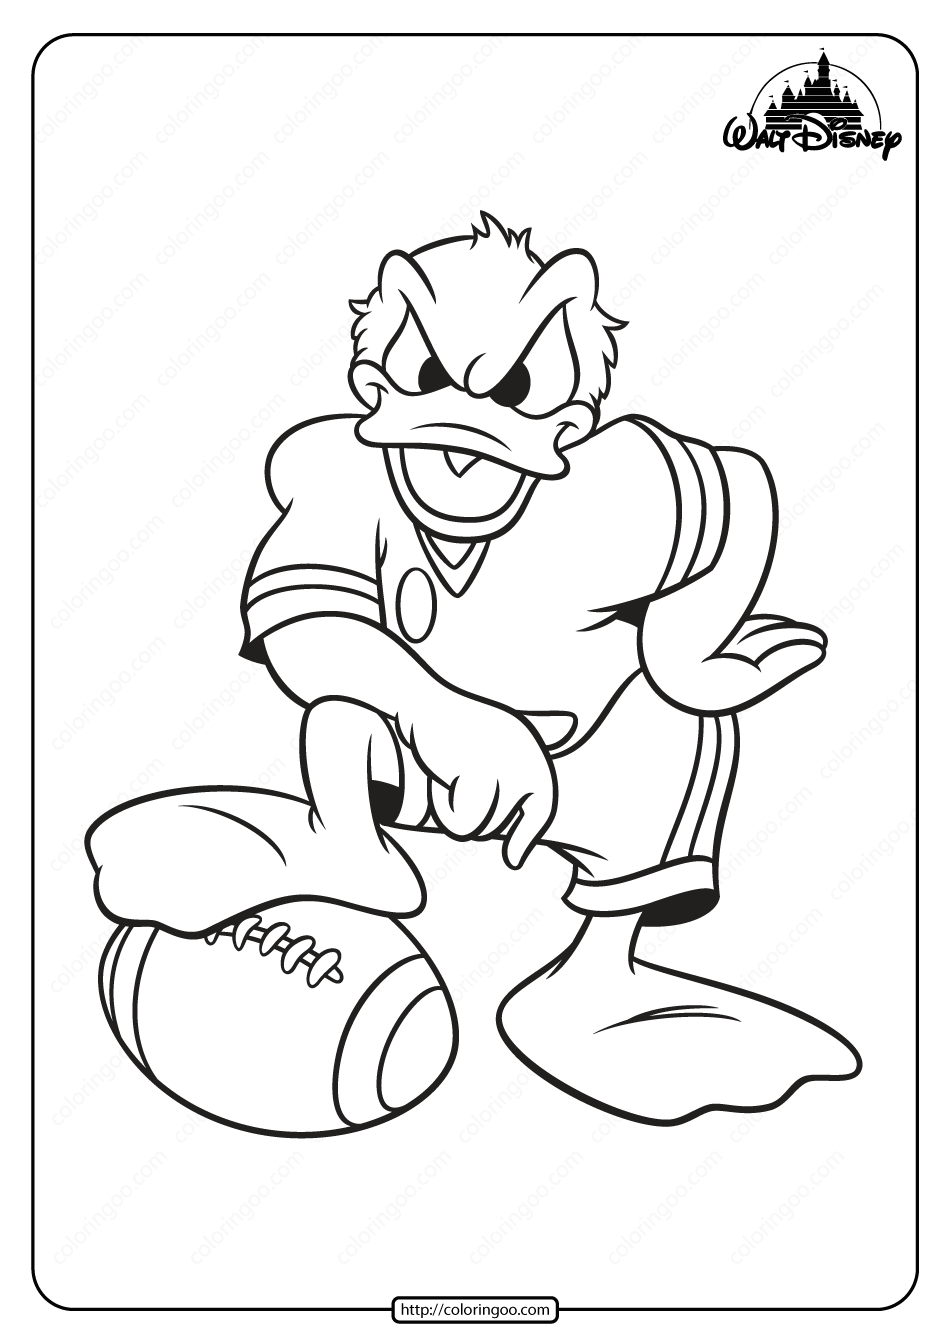 printable donald duck football player coloring page